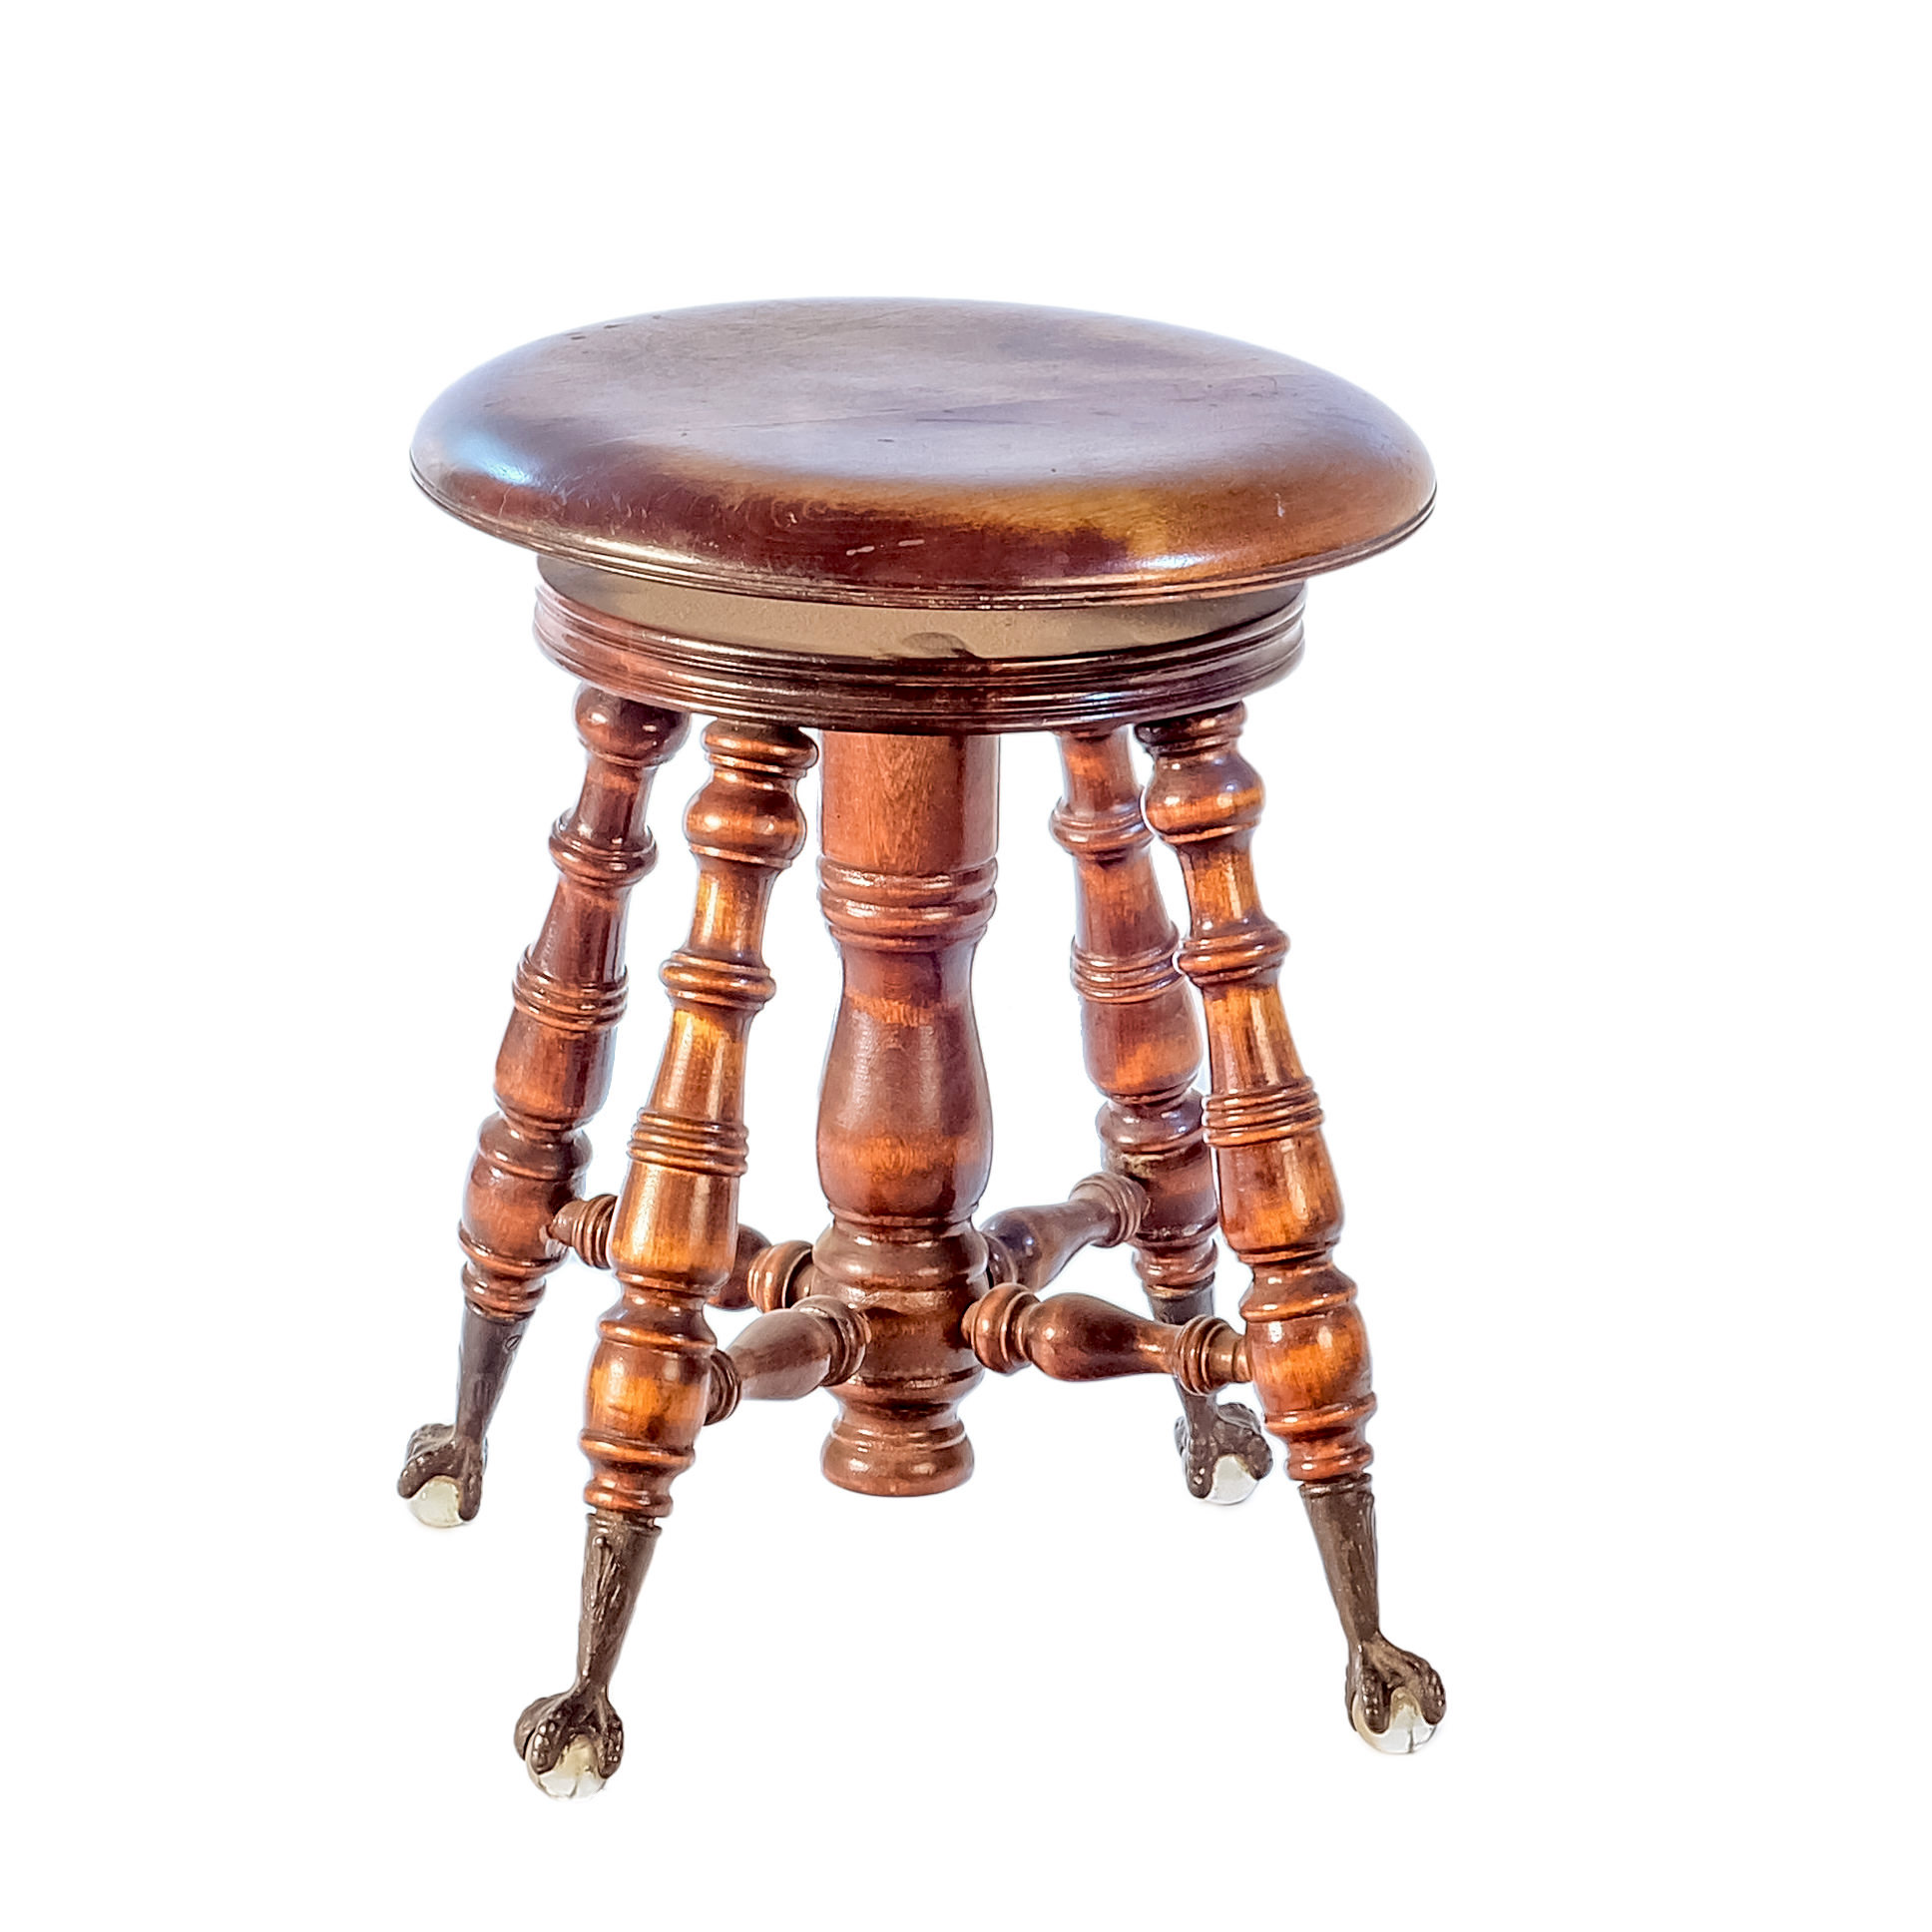 'American Maple Piano Stool with Brass Claw Sabots and Glass Ball Feet Late 19th Century'